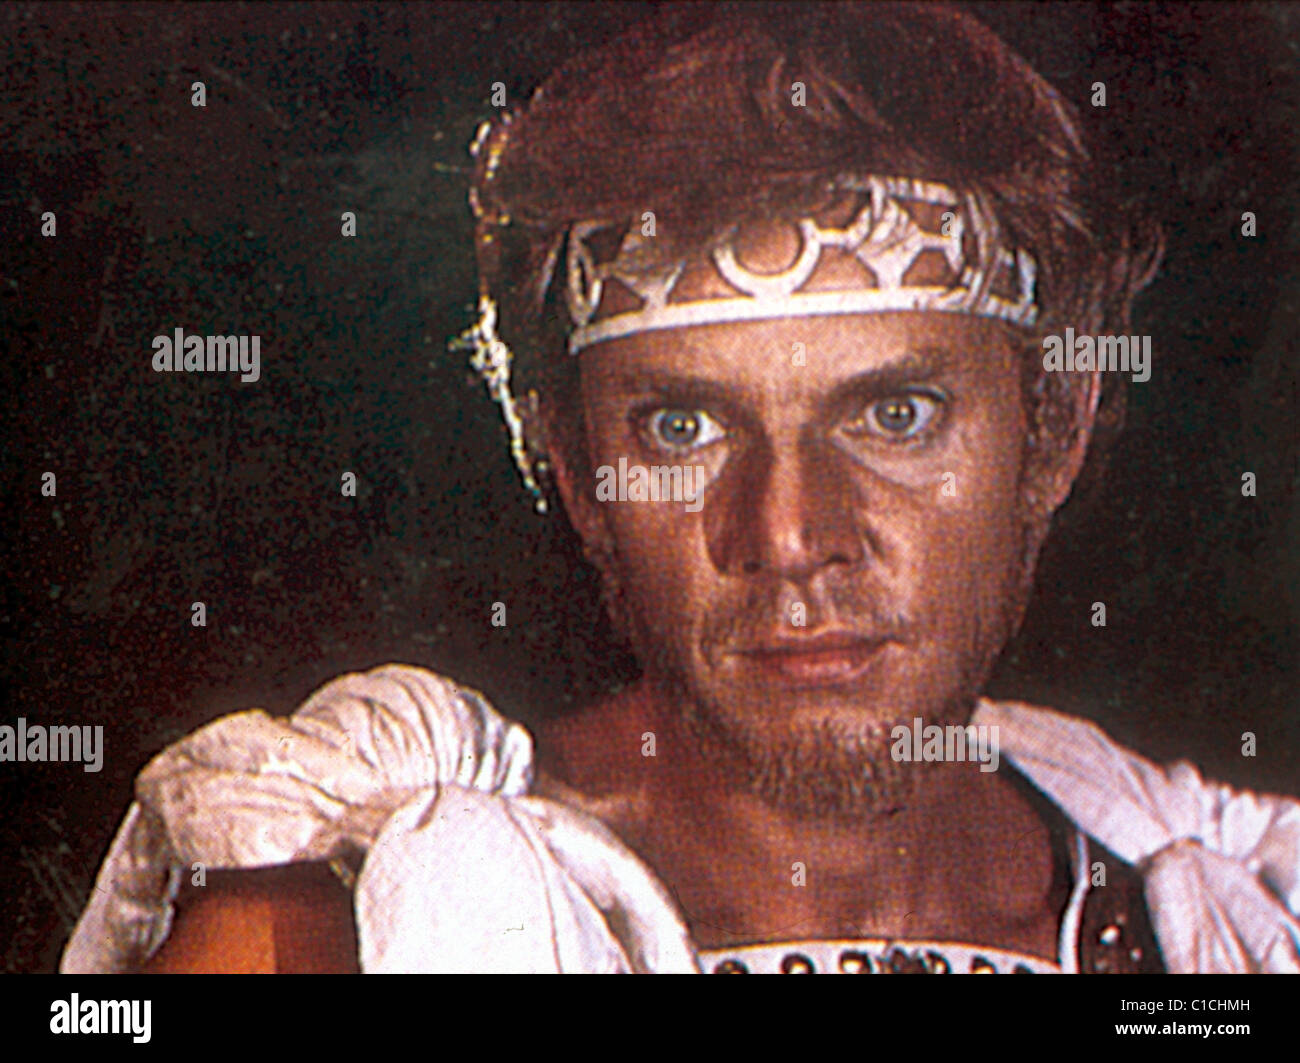 CALIGULA, mon fils (1979) MALCOLM MCDOWELL CLGL 054 COLLECTION MOVIESTORE LTD Banque D'Images